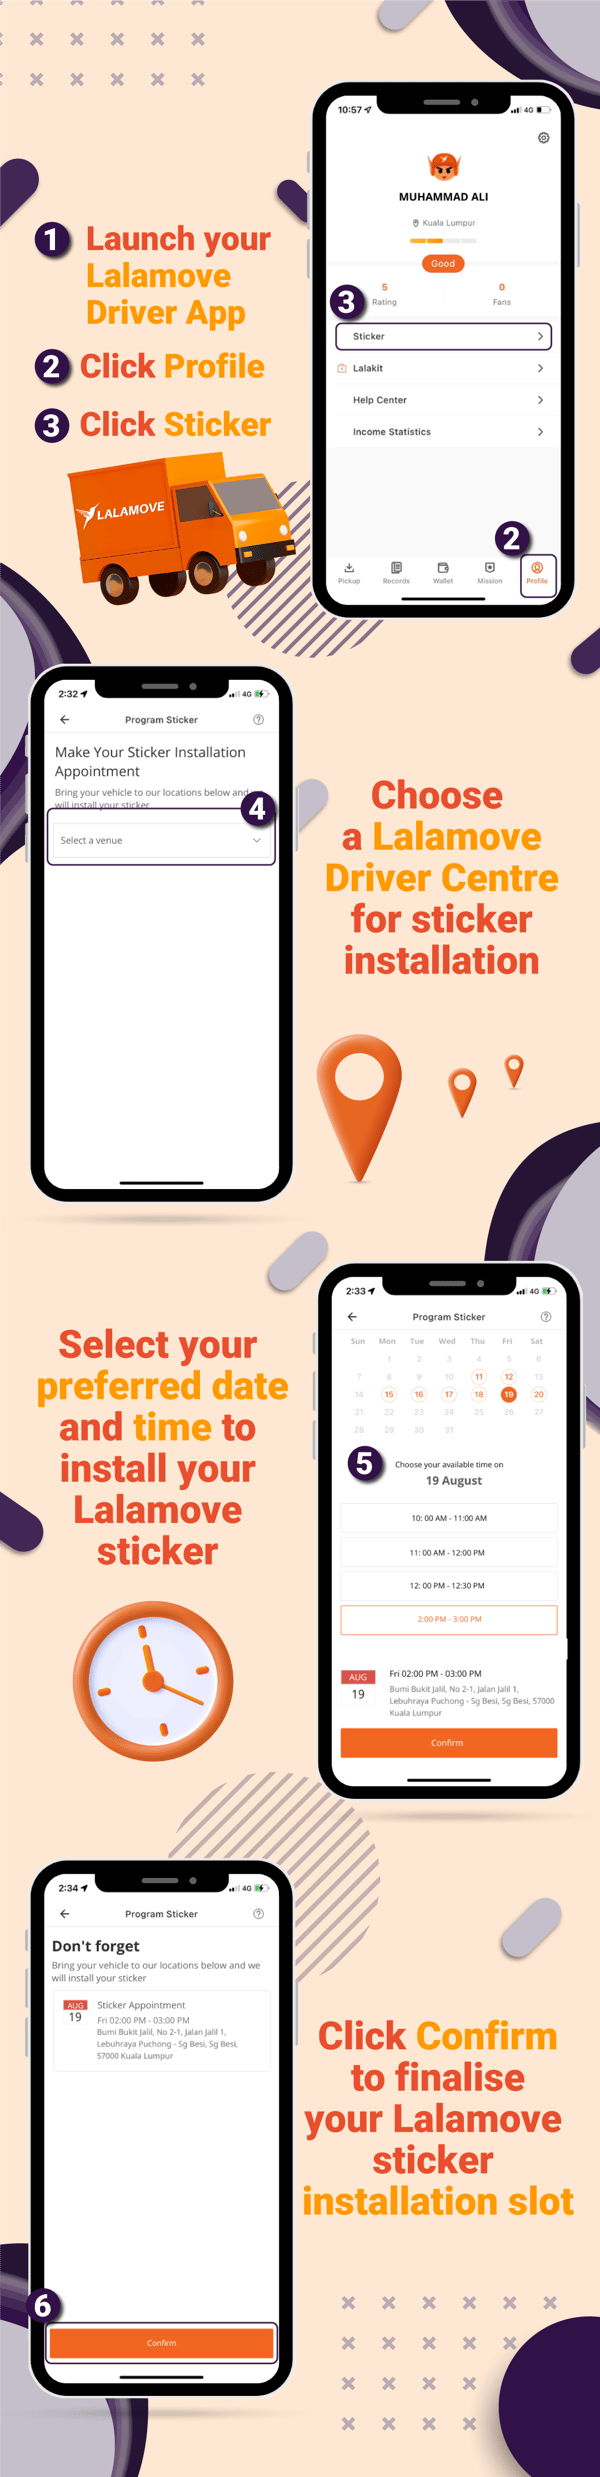 how to book your sticker installation slot in the lalamove driver app